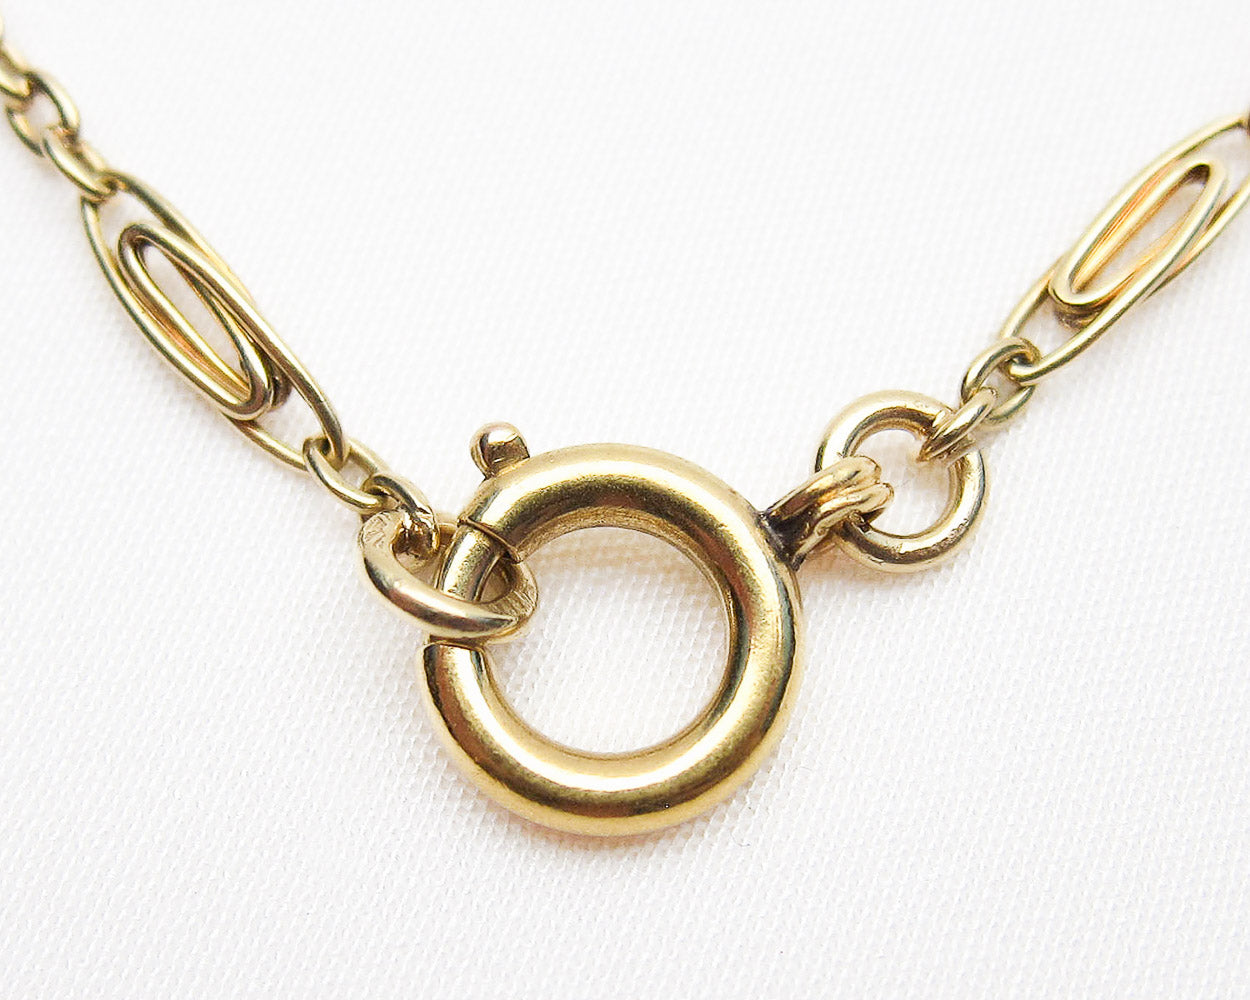 c. 1910 French 18KT Gold Chain